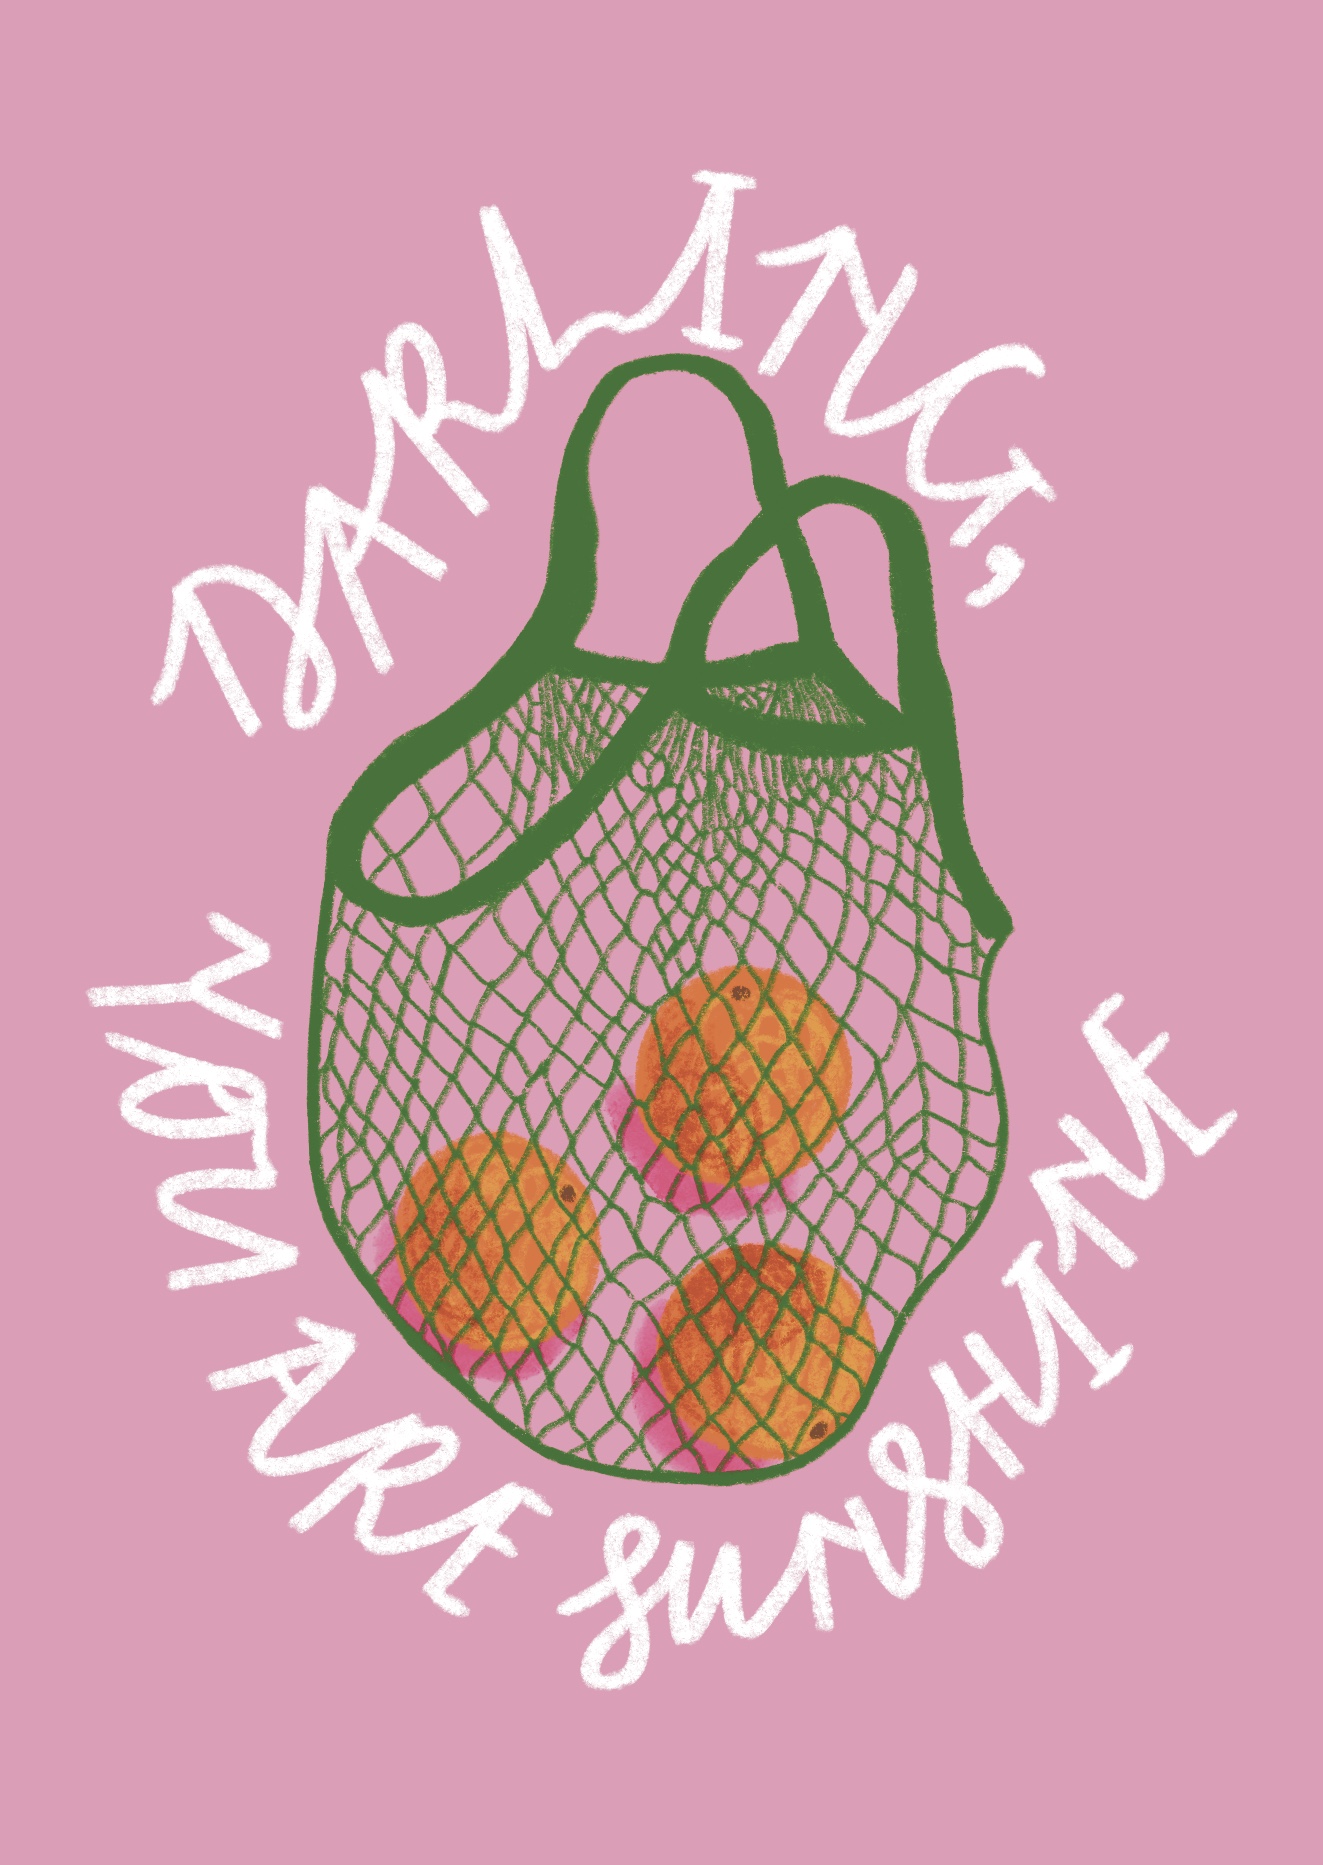 Oranges in a Green netting bag on a pink background with the words "Darling, you are sunshine" written around it, in the form of an illustrated positivity postcard